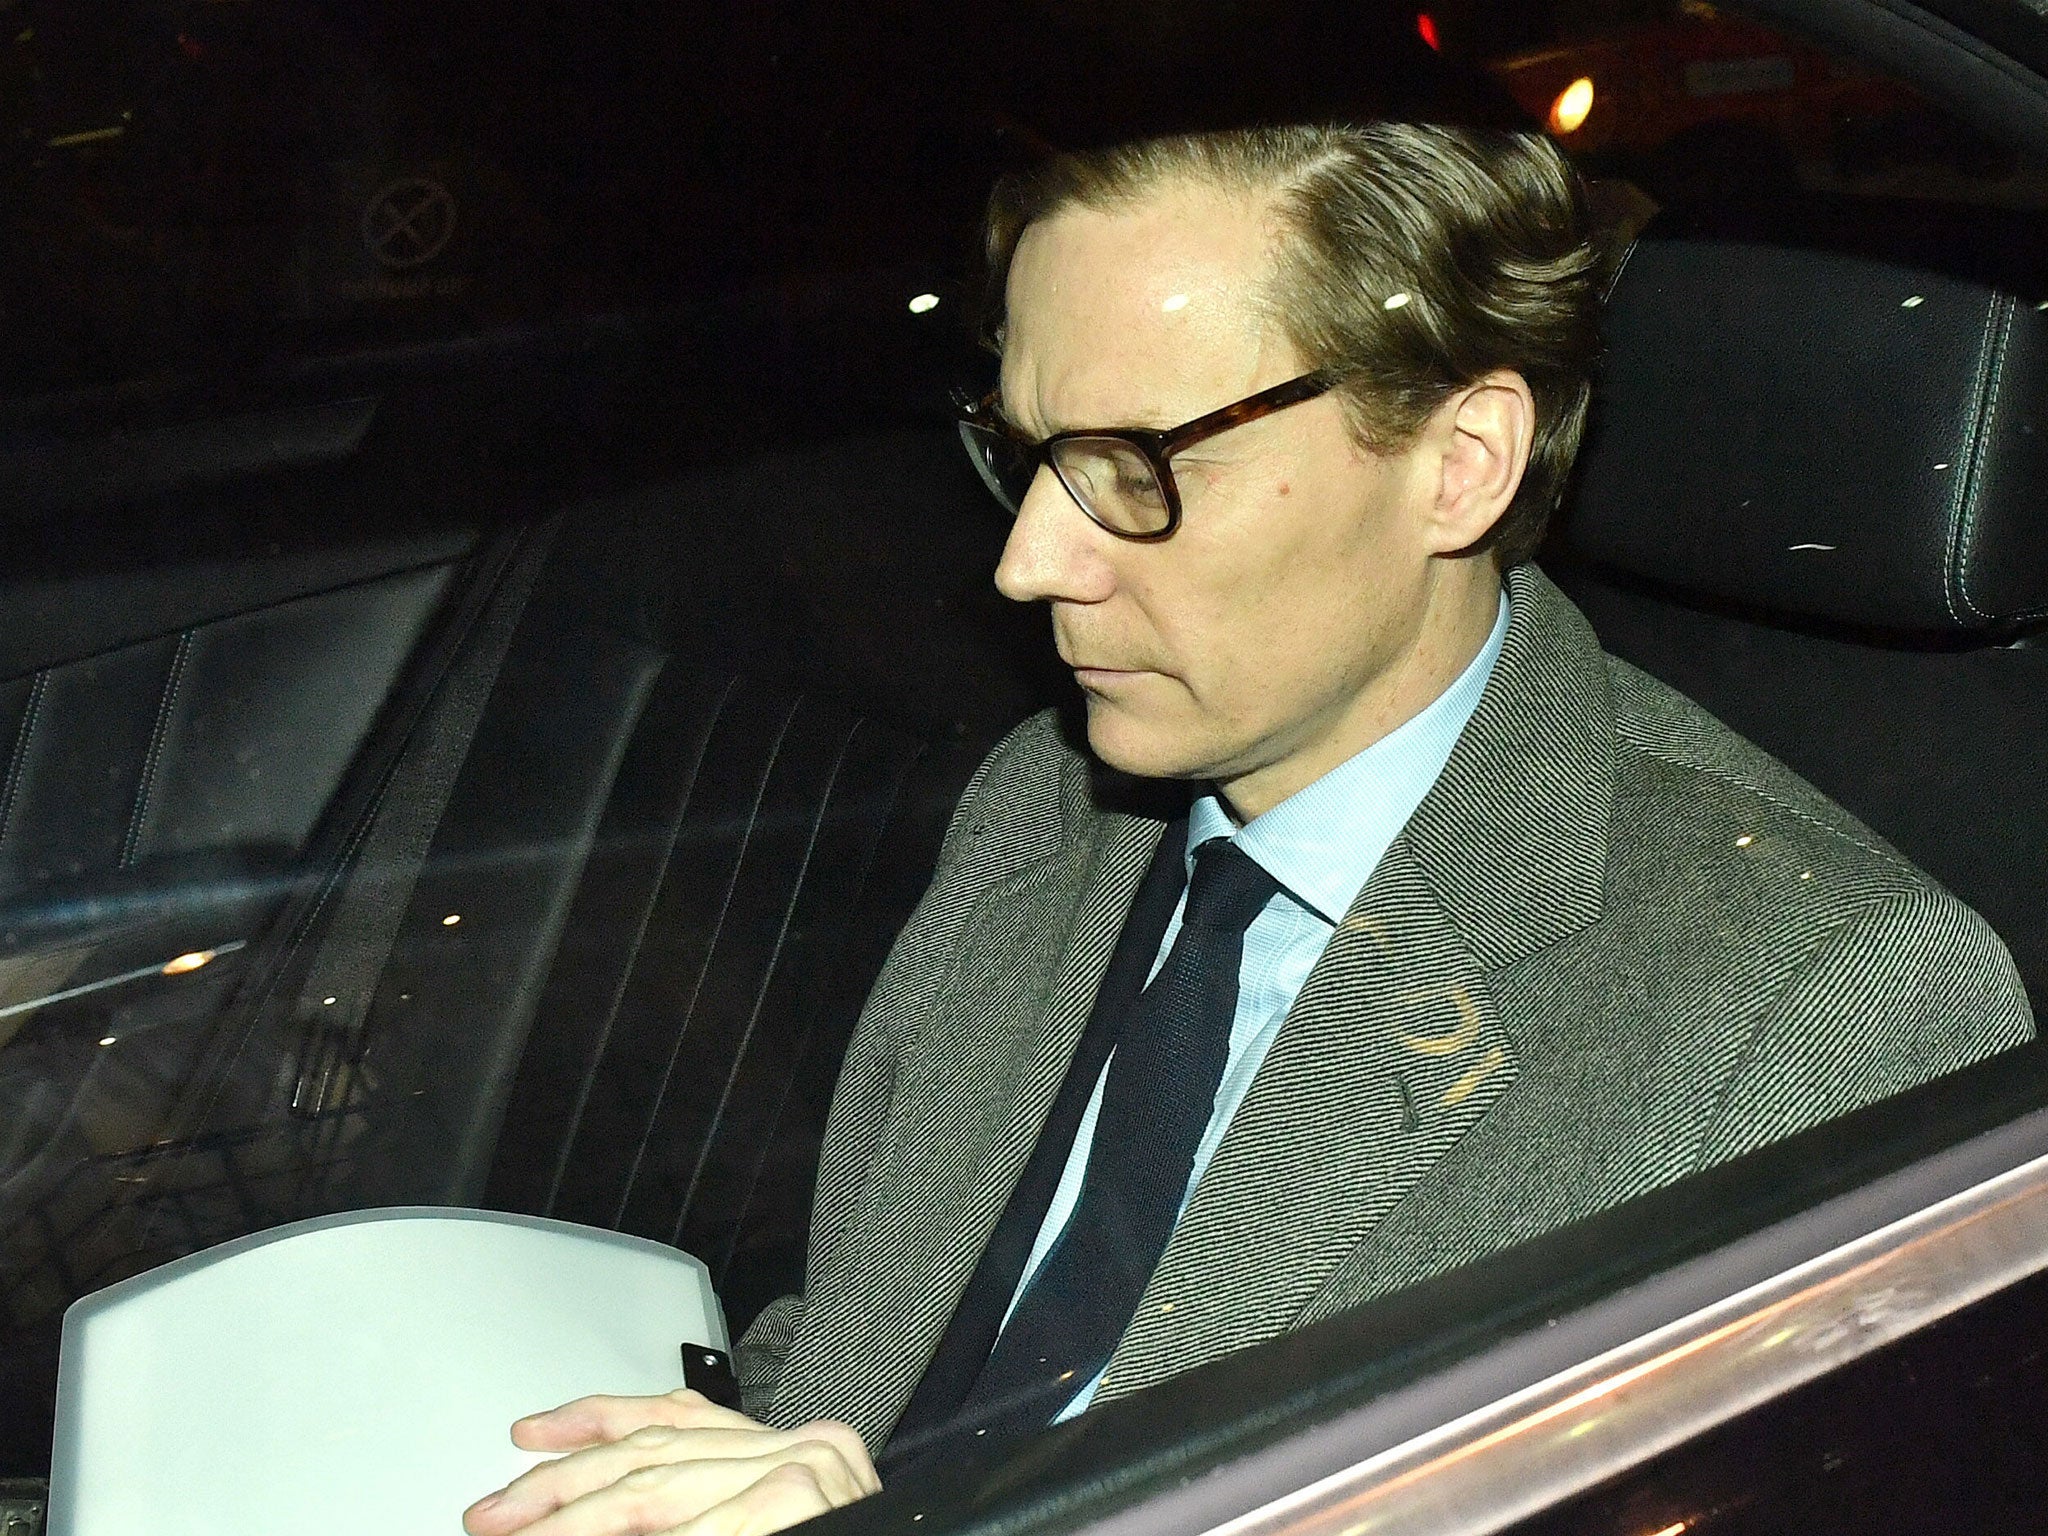 Alexander Nix left the Cambridge Analytica building at 6.30pm through a fire exit door (Dominic Lipinski/PA Wire)